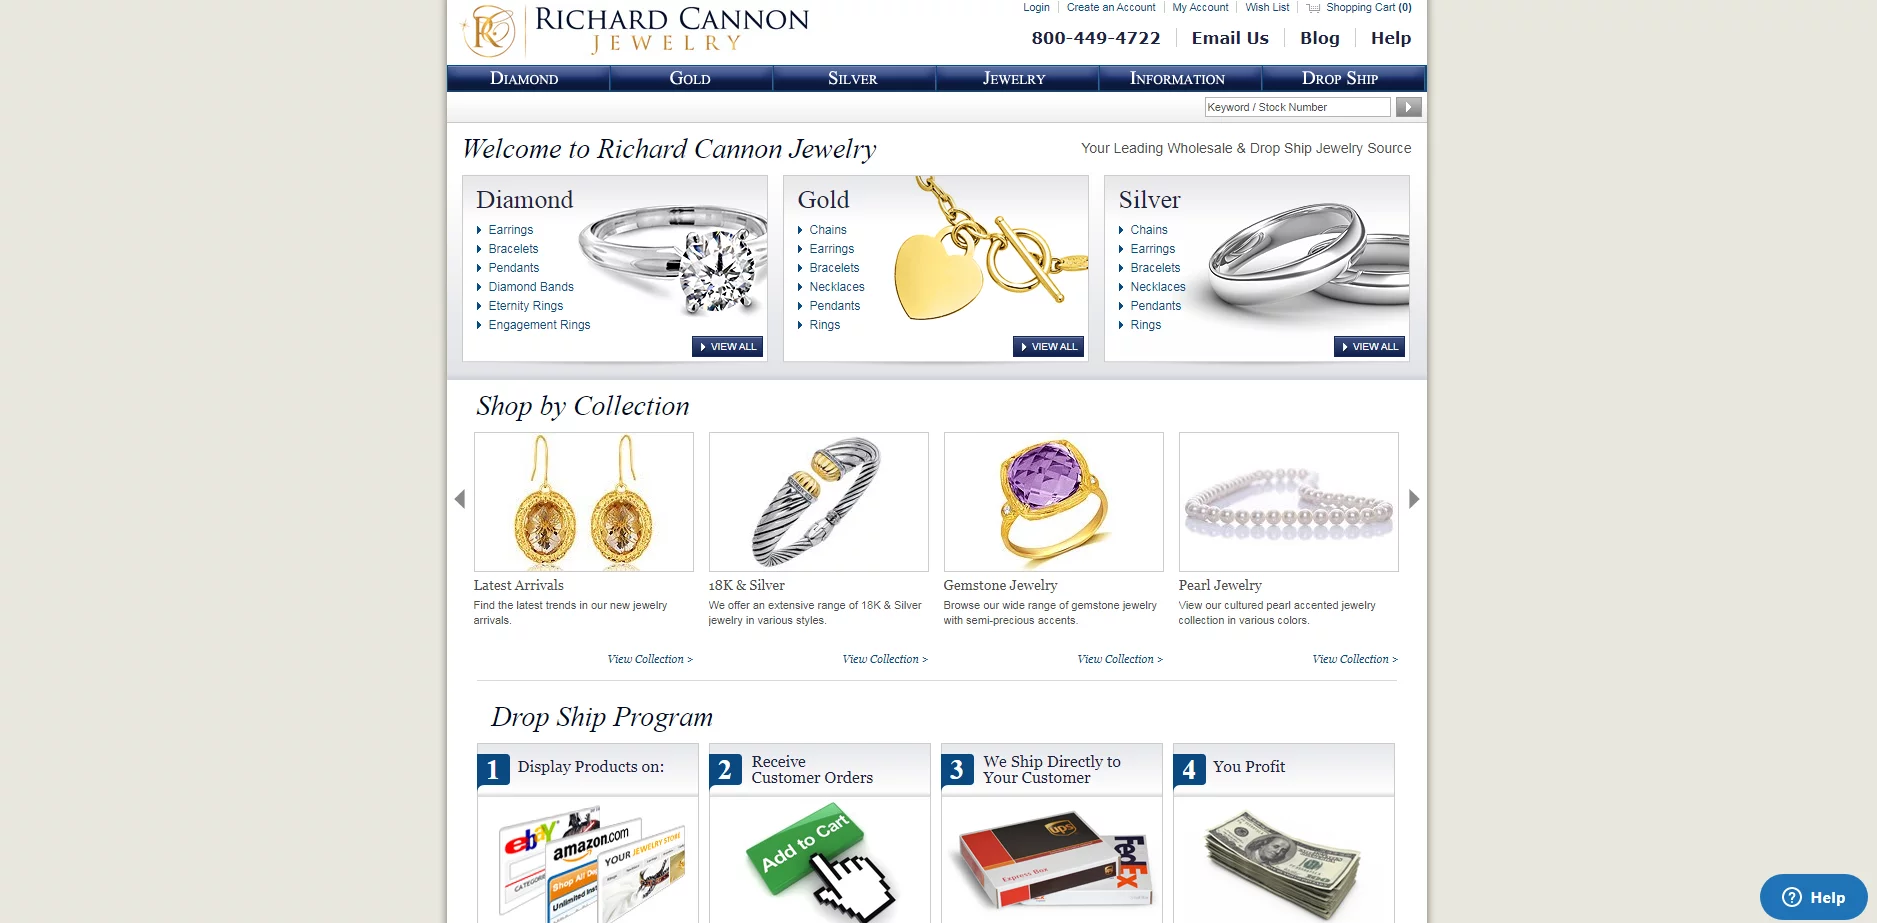 Best Jewelry Dropshipping Suppliers 3: Richard Cannon Jewelry